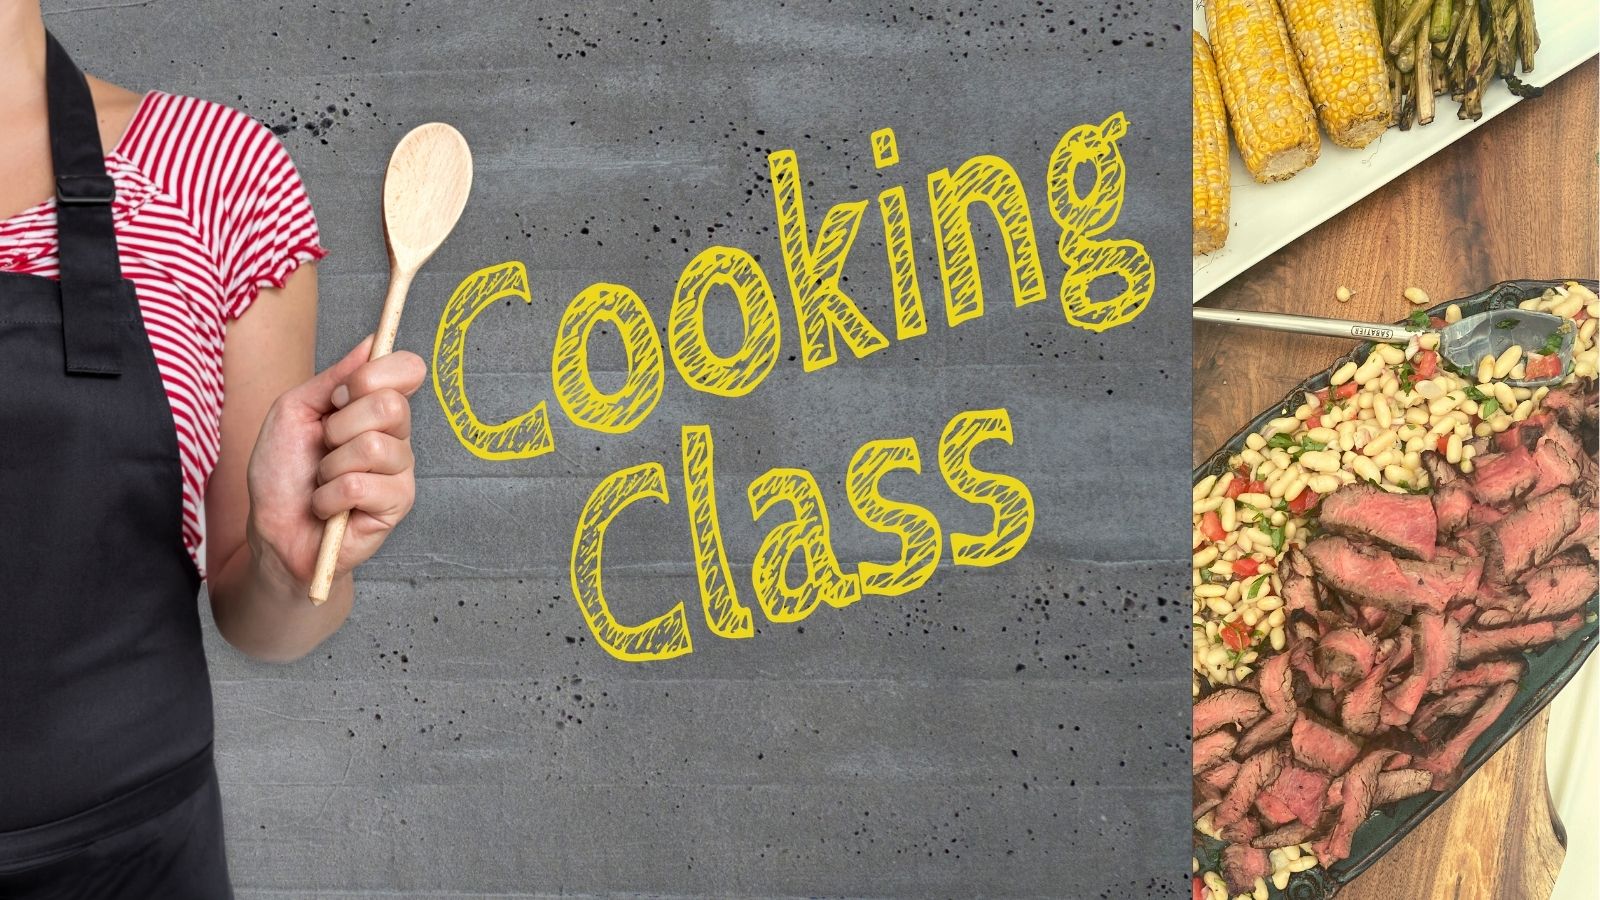 cooking class